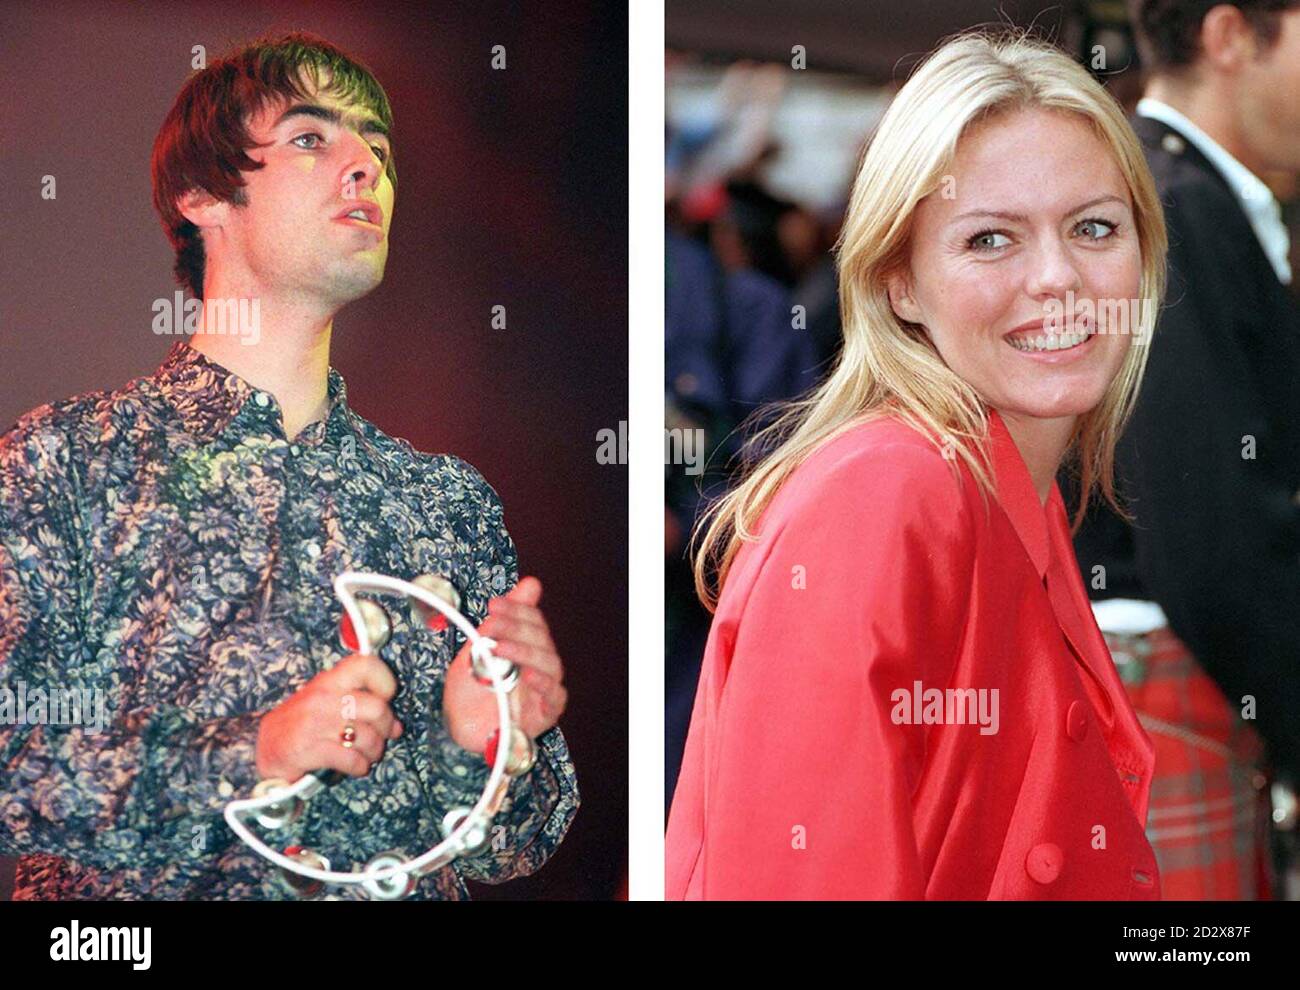 Library filers of Liam Gallagher of Oasis and actress girlfriend Patsy Kensit. Their seven-month old fiery relationship took another turn  when it was reported that they had become engaged. Liam noted that Patsy's ring, bought in London's Hatton Garden, cost him 'an arm, a leg and a head!'  13/09/96 It was reported that some Oasis fans were blaming Miss Kensit's affair with the younger Gallagher brother as one of the reasons for friction within the band.  Liam/Photo by David Cheskin.  Stock Photo